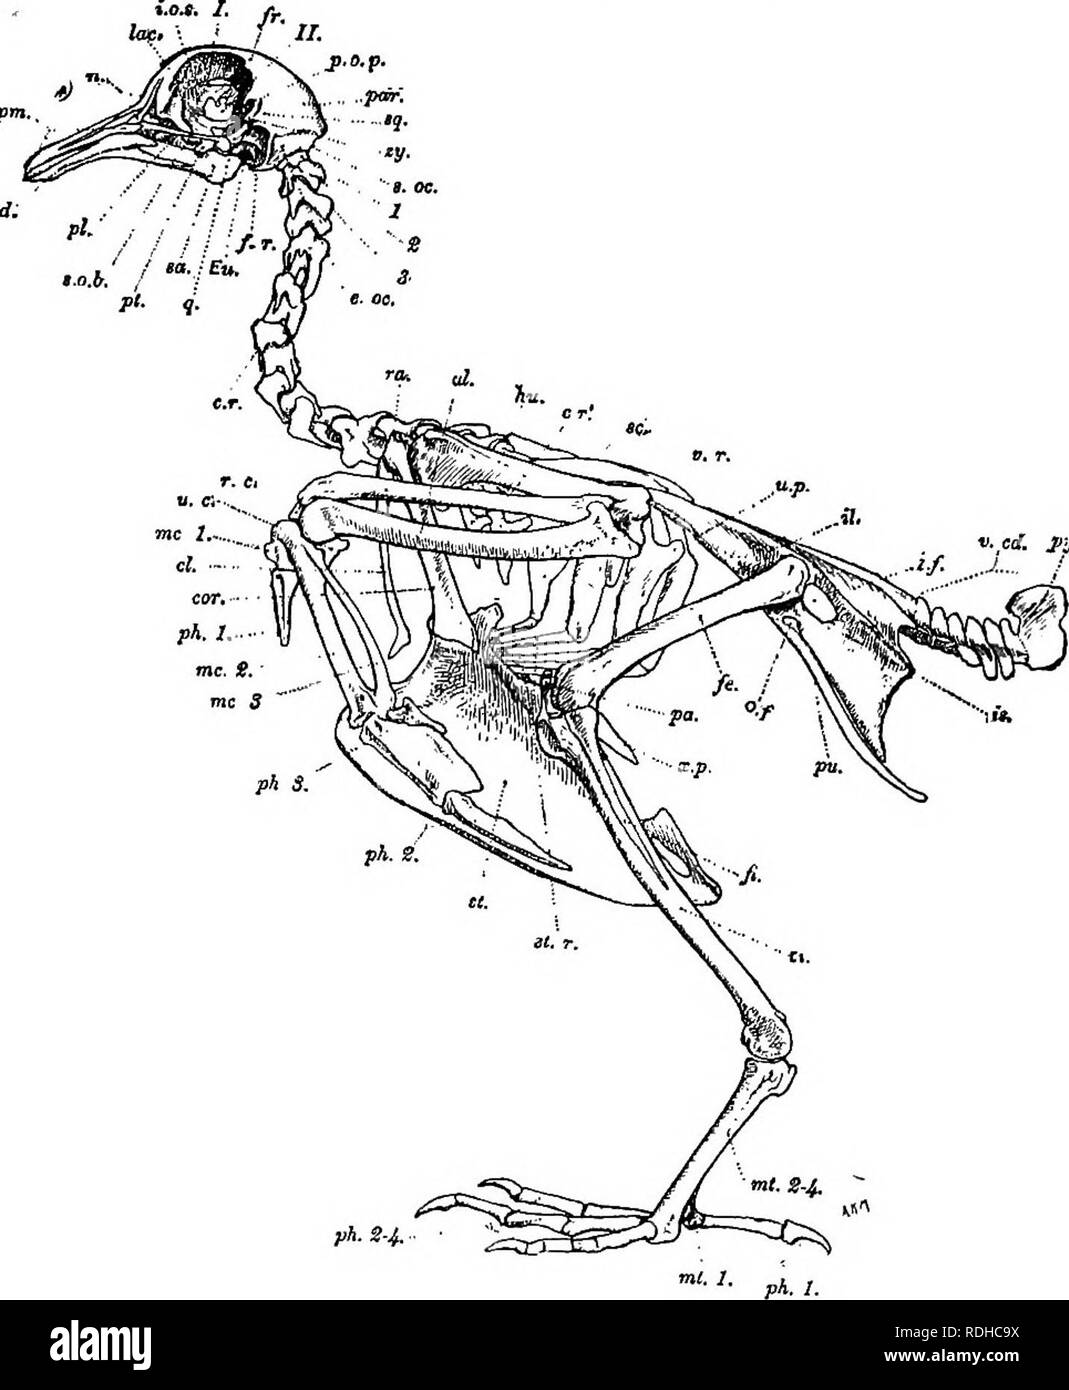 . A manual of elementary zoology . Zoology. THE PIGEON 403 frog. The bones are very light and spongy in texture, and most of them, except those of the tail, forearm, hand, and hind-. Fig. 293.—The skeleton of a pigeon, seen from the left side. c.r.j Fixed cervical rib; c.r'., free cervical ribs ; cl.t clavicle ; cor., coracoid; d., dentary; Mu., Eustachian tube; e.oc, exoccipital f.r.y fenestral recess;^., femur 'yji'i fibula '.Jr., frontal; hu., humerus; i.f., iliosciatic foramen ; i.o.s., interorbital septum ; il., ilium ; zj., ischium ; lac, lacrymal; inc. 1-3, metacar- pals ; mt. 1-4, met Stock Photo